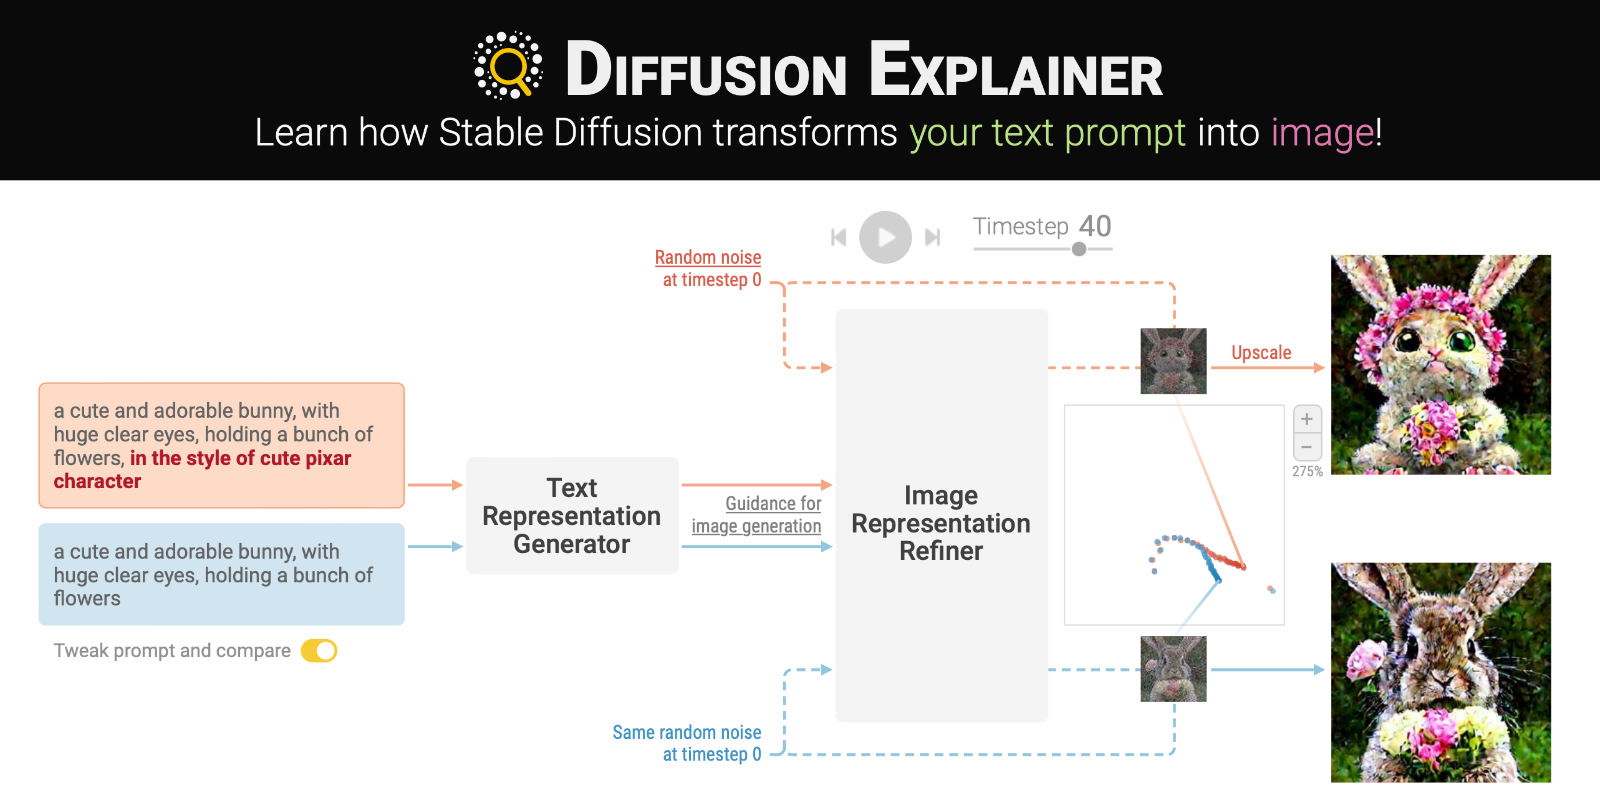 Diffusion Explainer: Learn how Stable Diffusion transforms your text prompt into image!